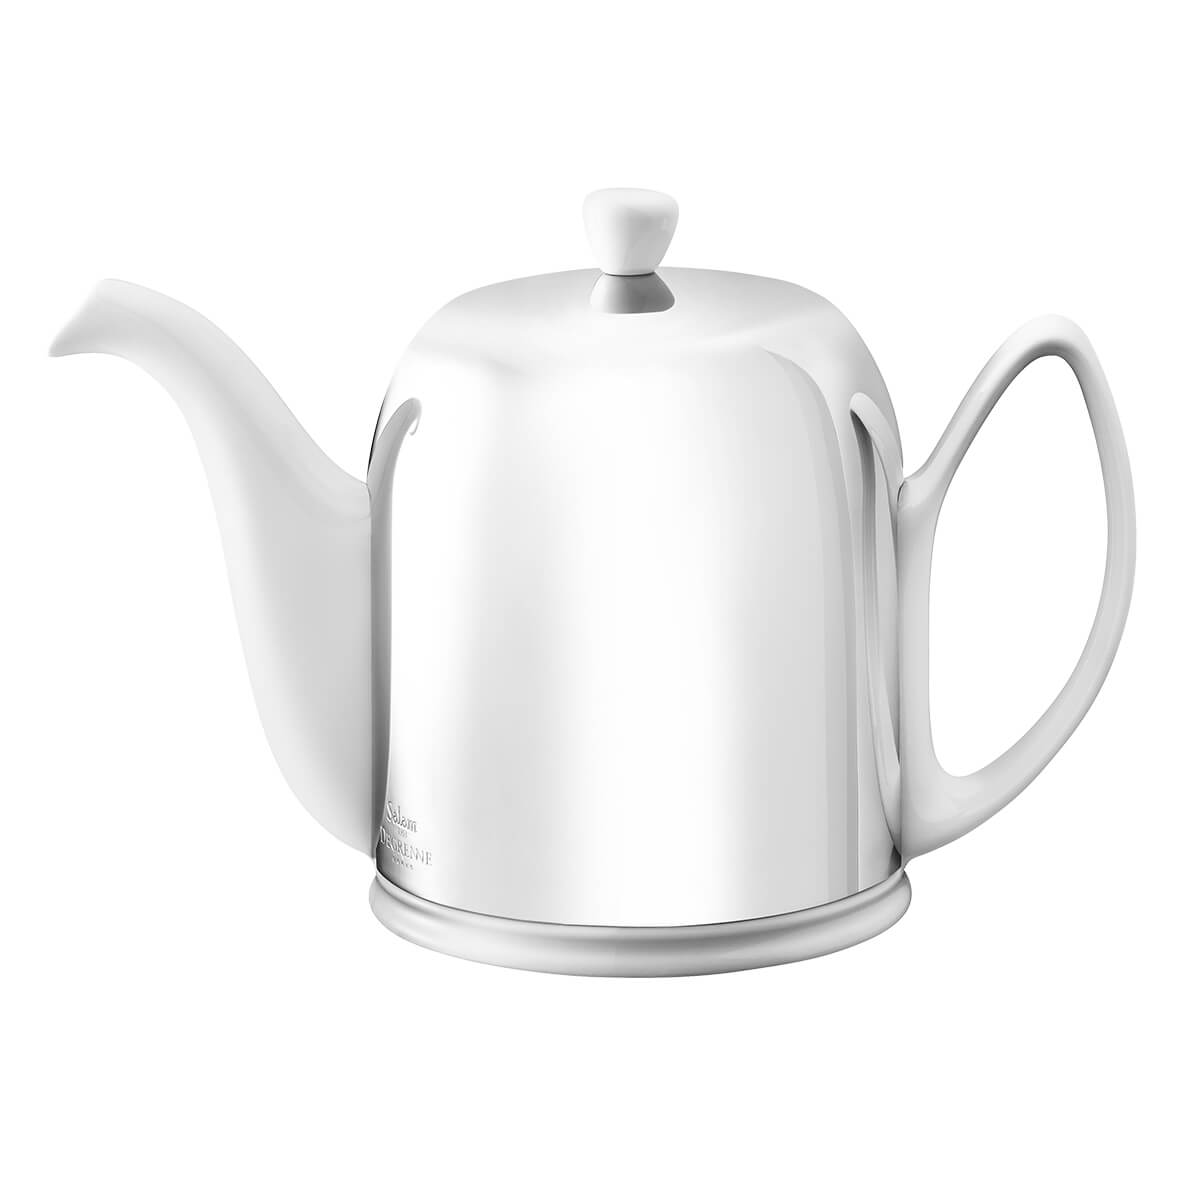 Degrenne Salam Teapot with Insulated Stainless Steel Cover, 5 Colors